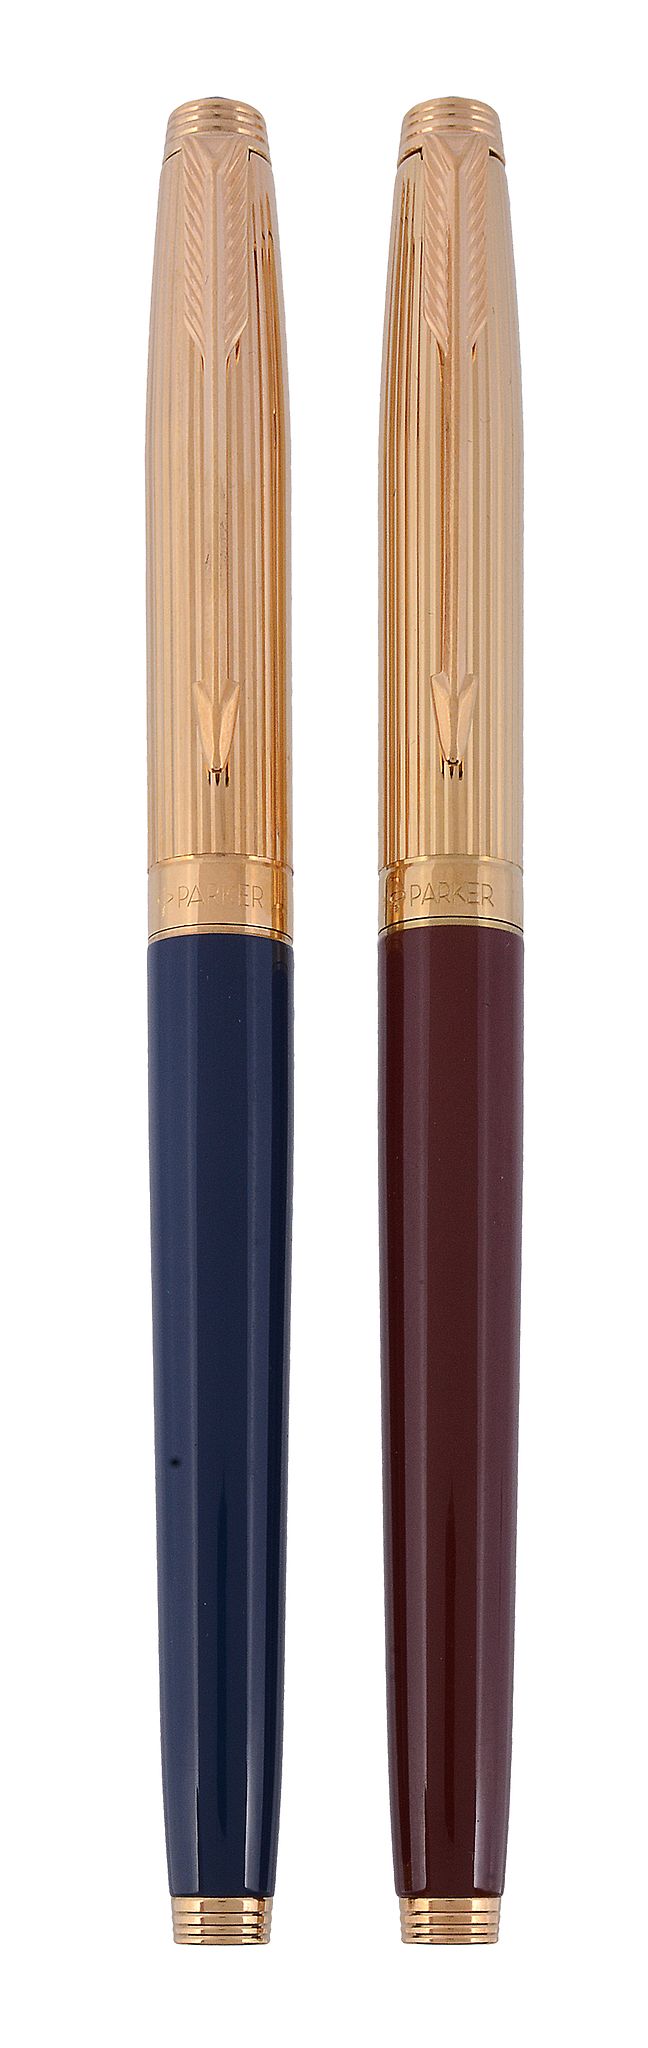 Parker, 75, a red lacquer fountain pen,   with a red lacquer barrel and striated cap, the nib